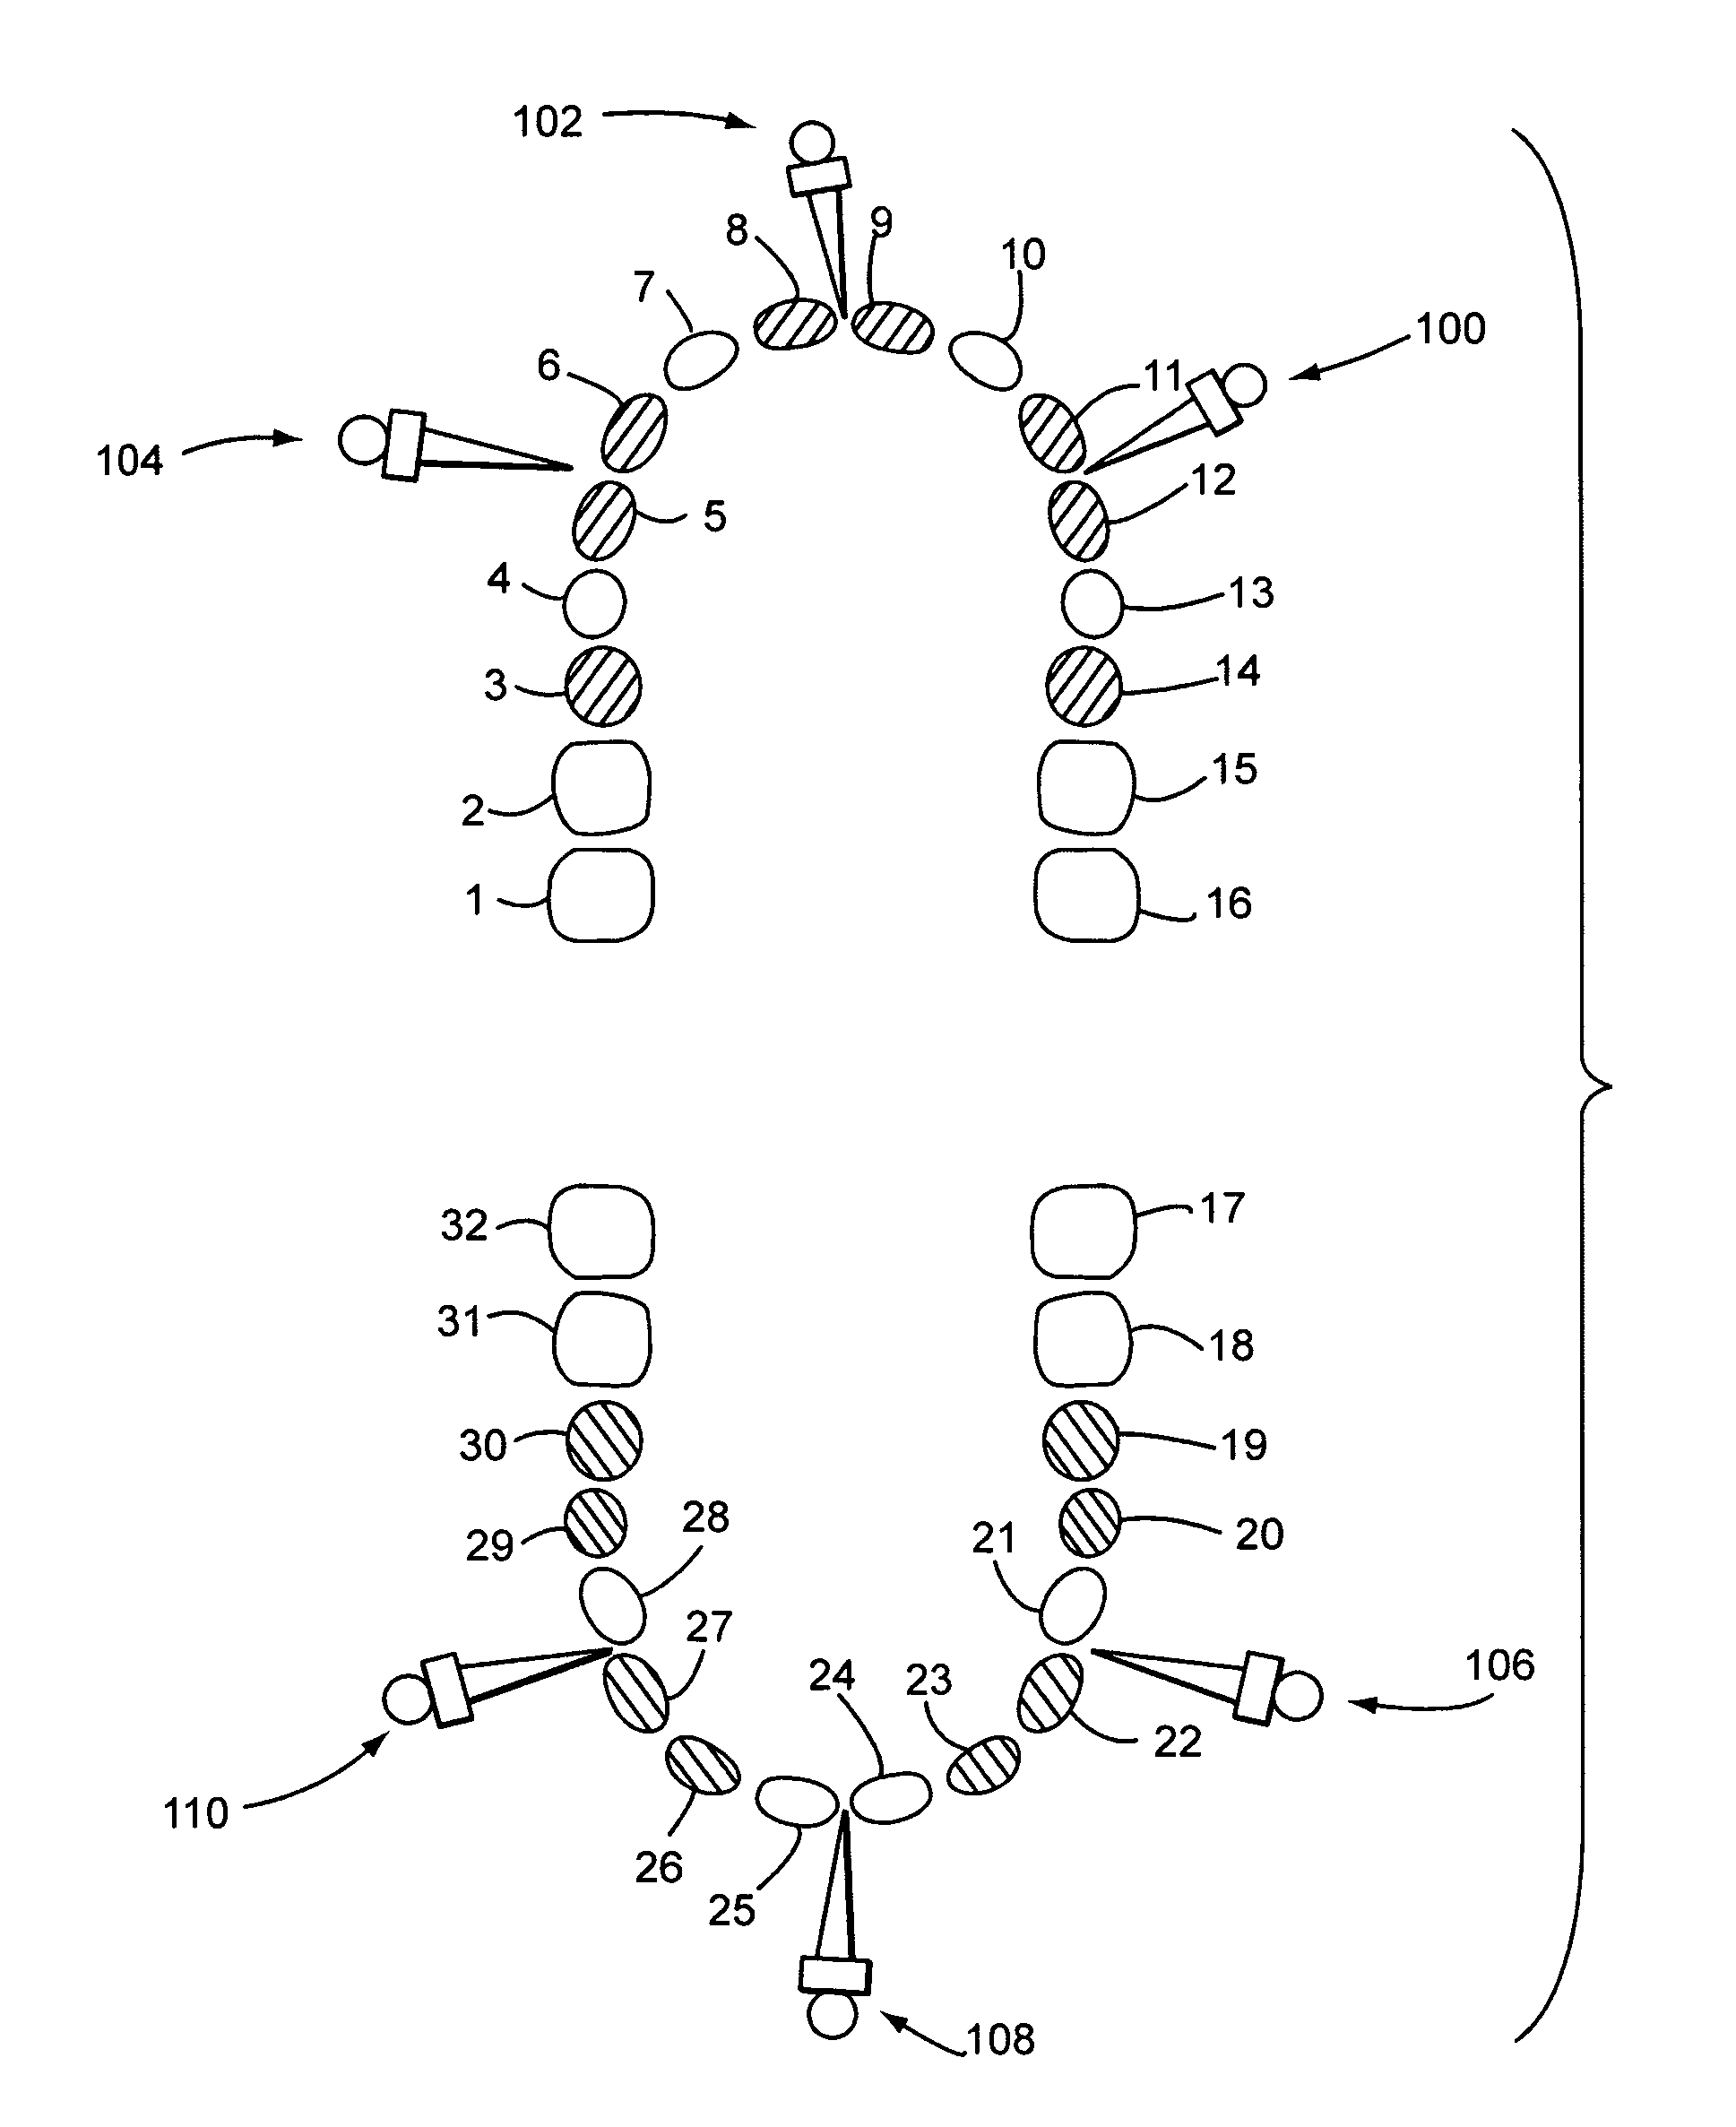 Capture of a planned vertical dimension of occlusion to facilitate simultaneous restoration of both maxillary and mandibular arches using implants